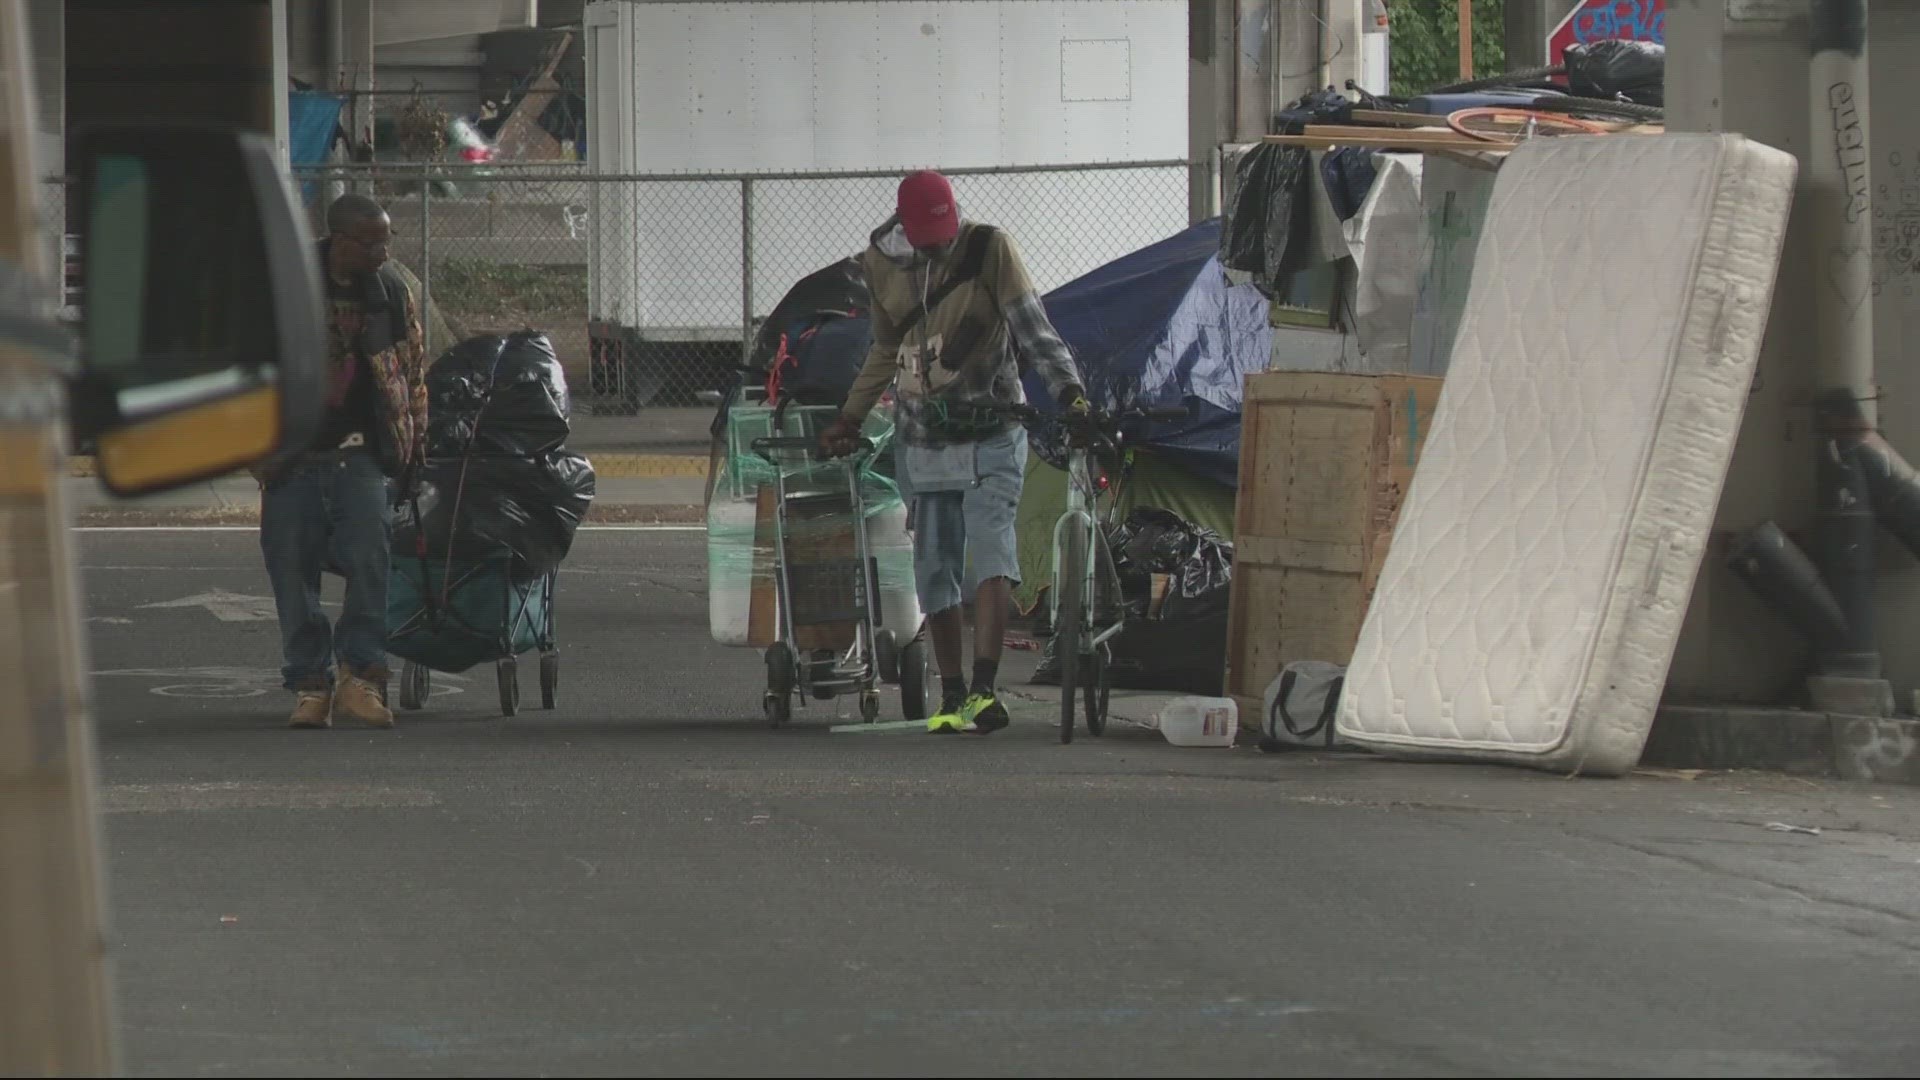 The county has been sitting on millions of unspent funds while homeless service providers, shelters in Portland have been looking to them for financial help.